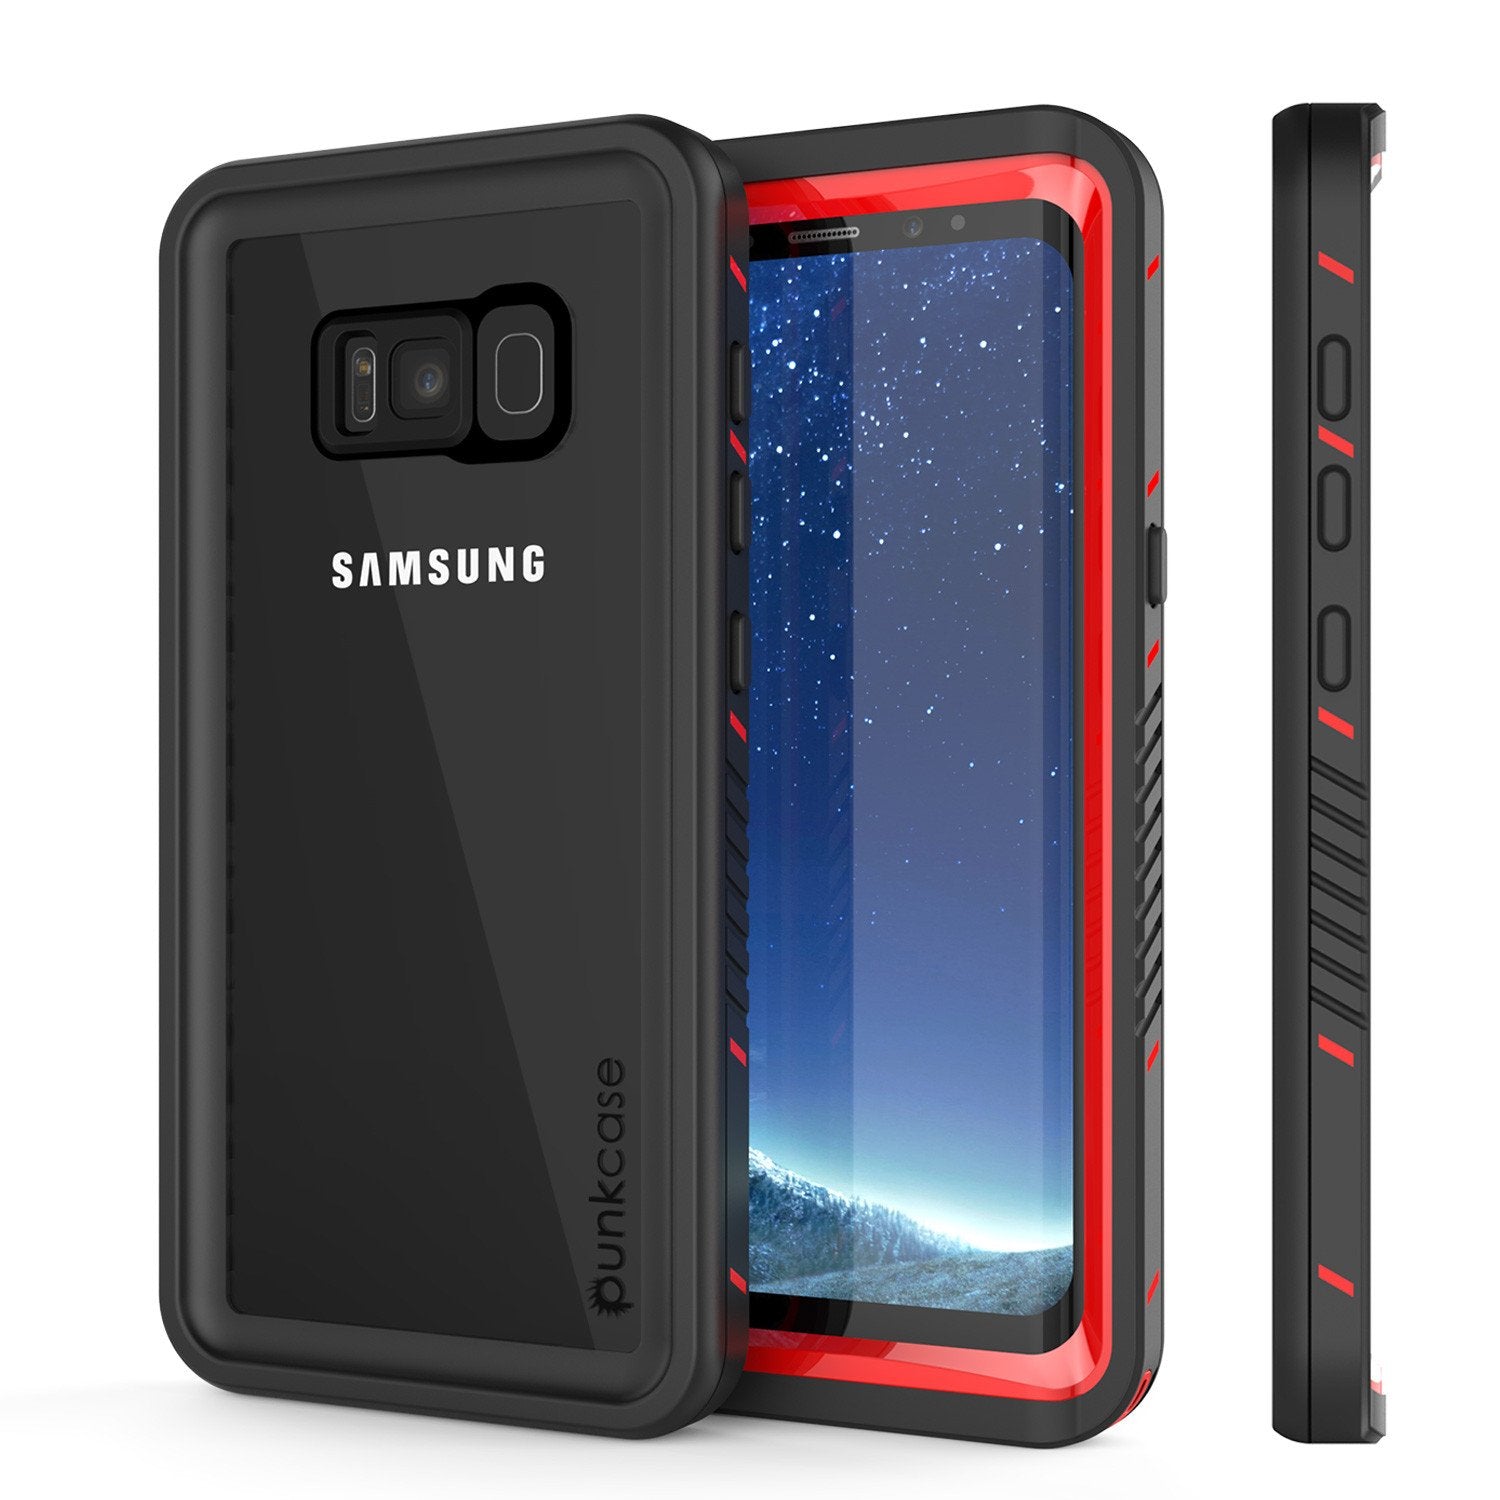 Galaxy S8 PLUS Waterproof Case, Punkcase [Extreme Series] Slim Fit, Armor Cover W/ Built In Screen Protector for Samsung Galaxy S8+ [Red]